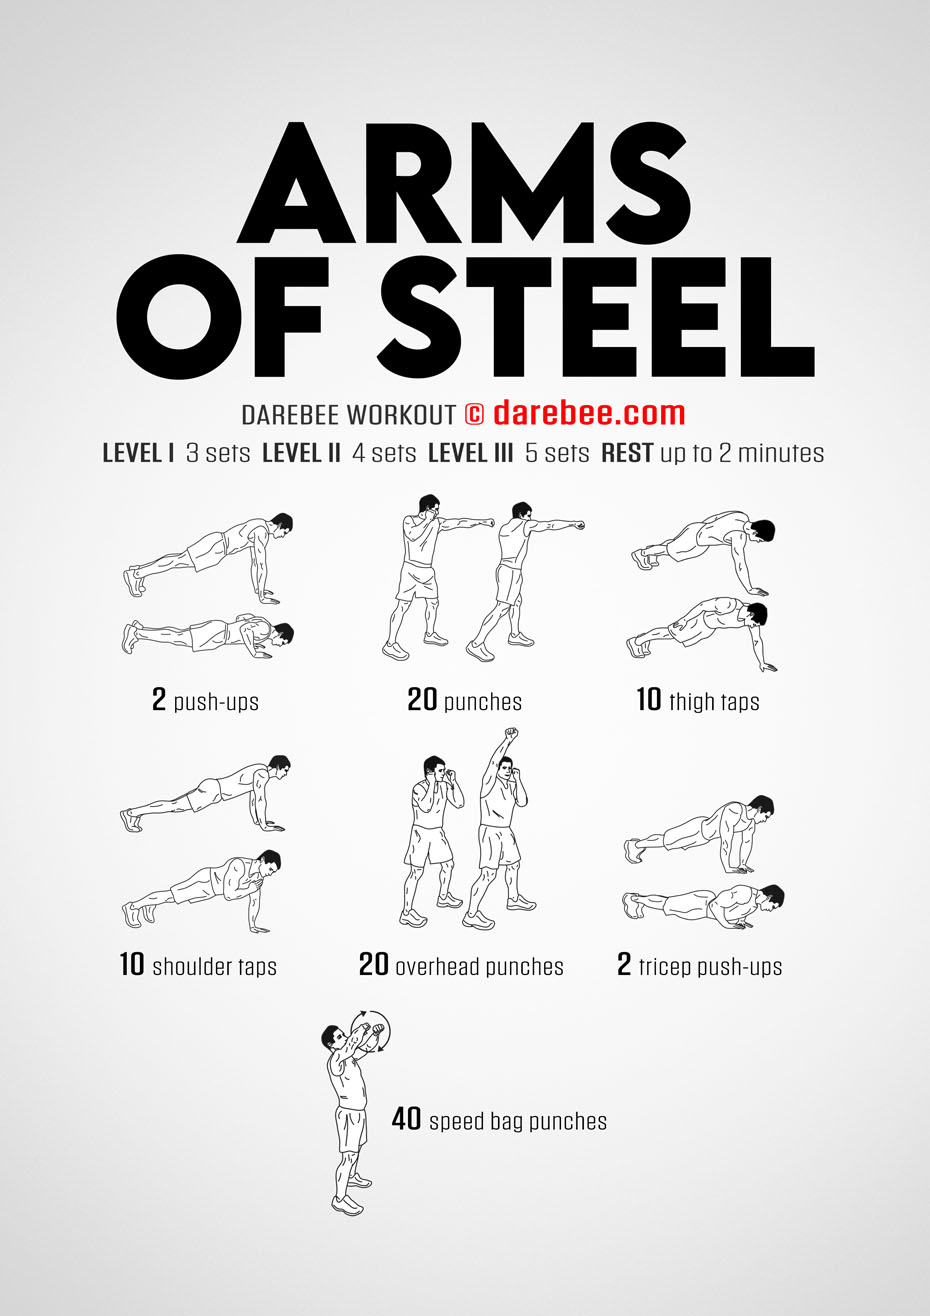 Arms of Steel Workout